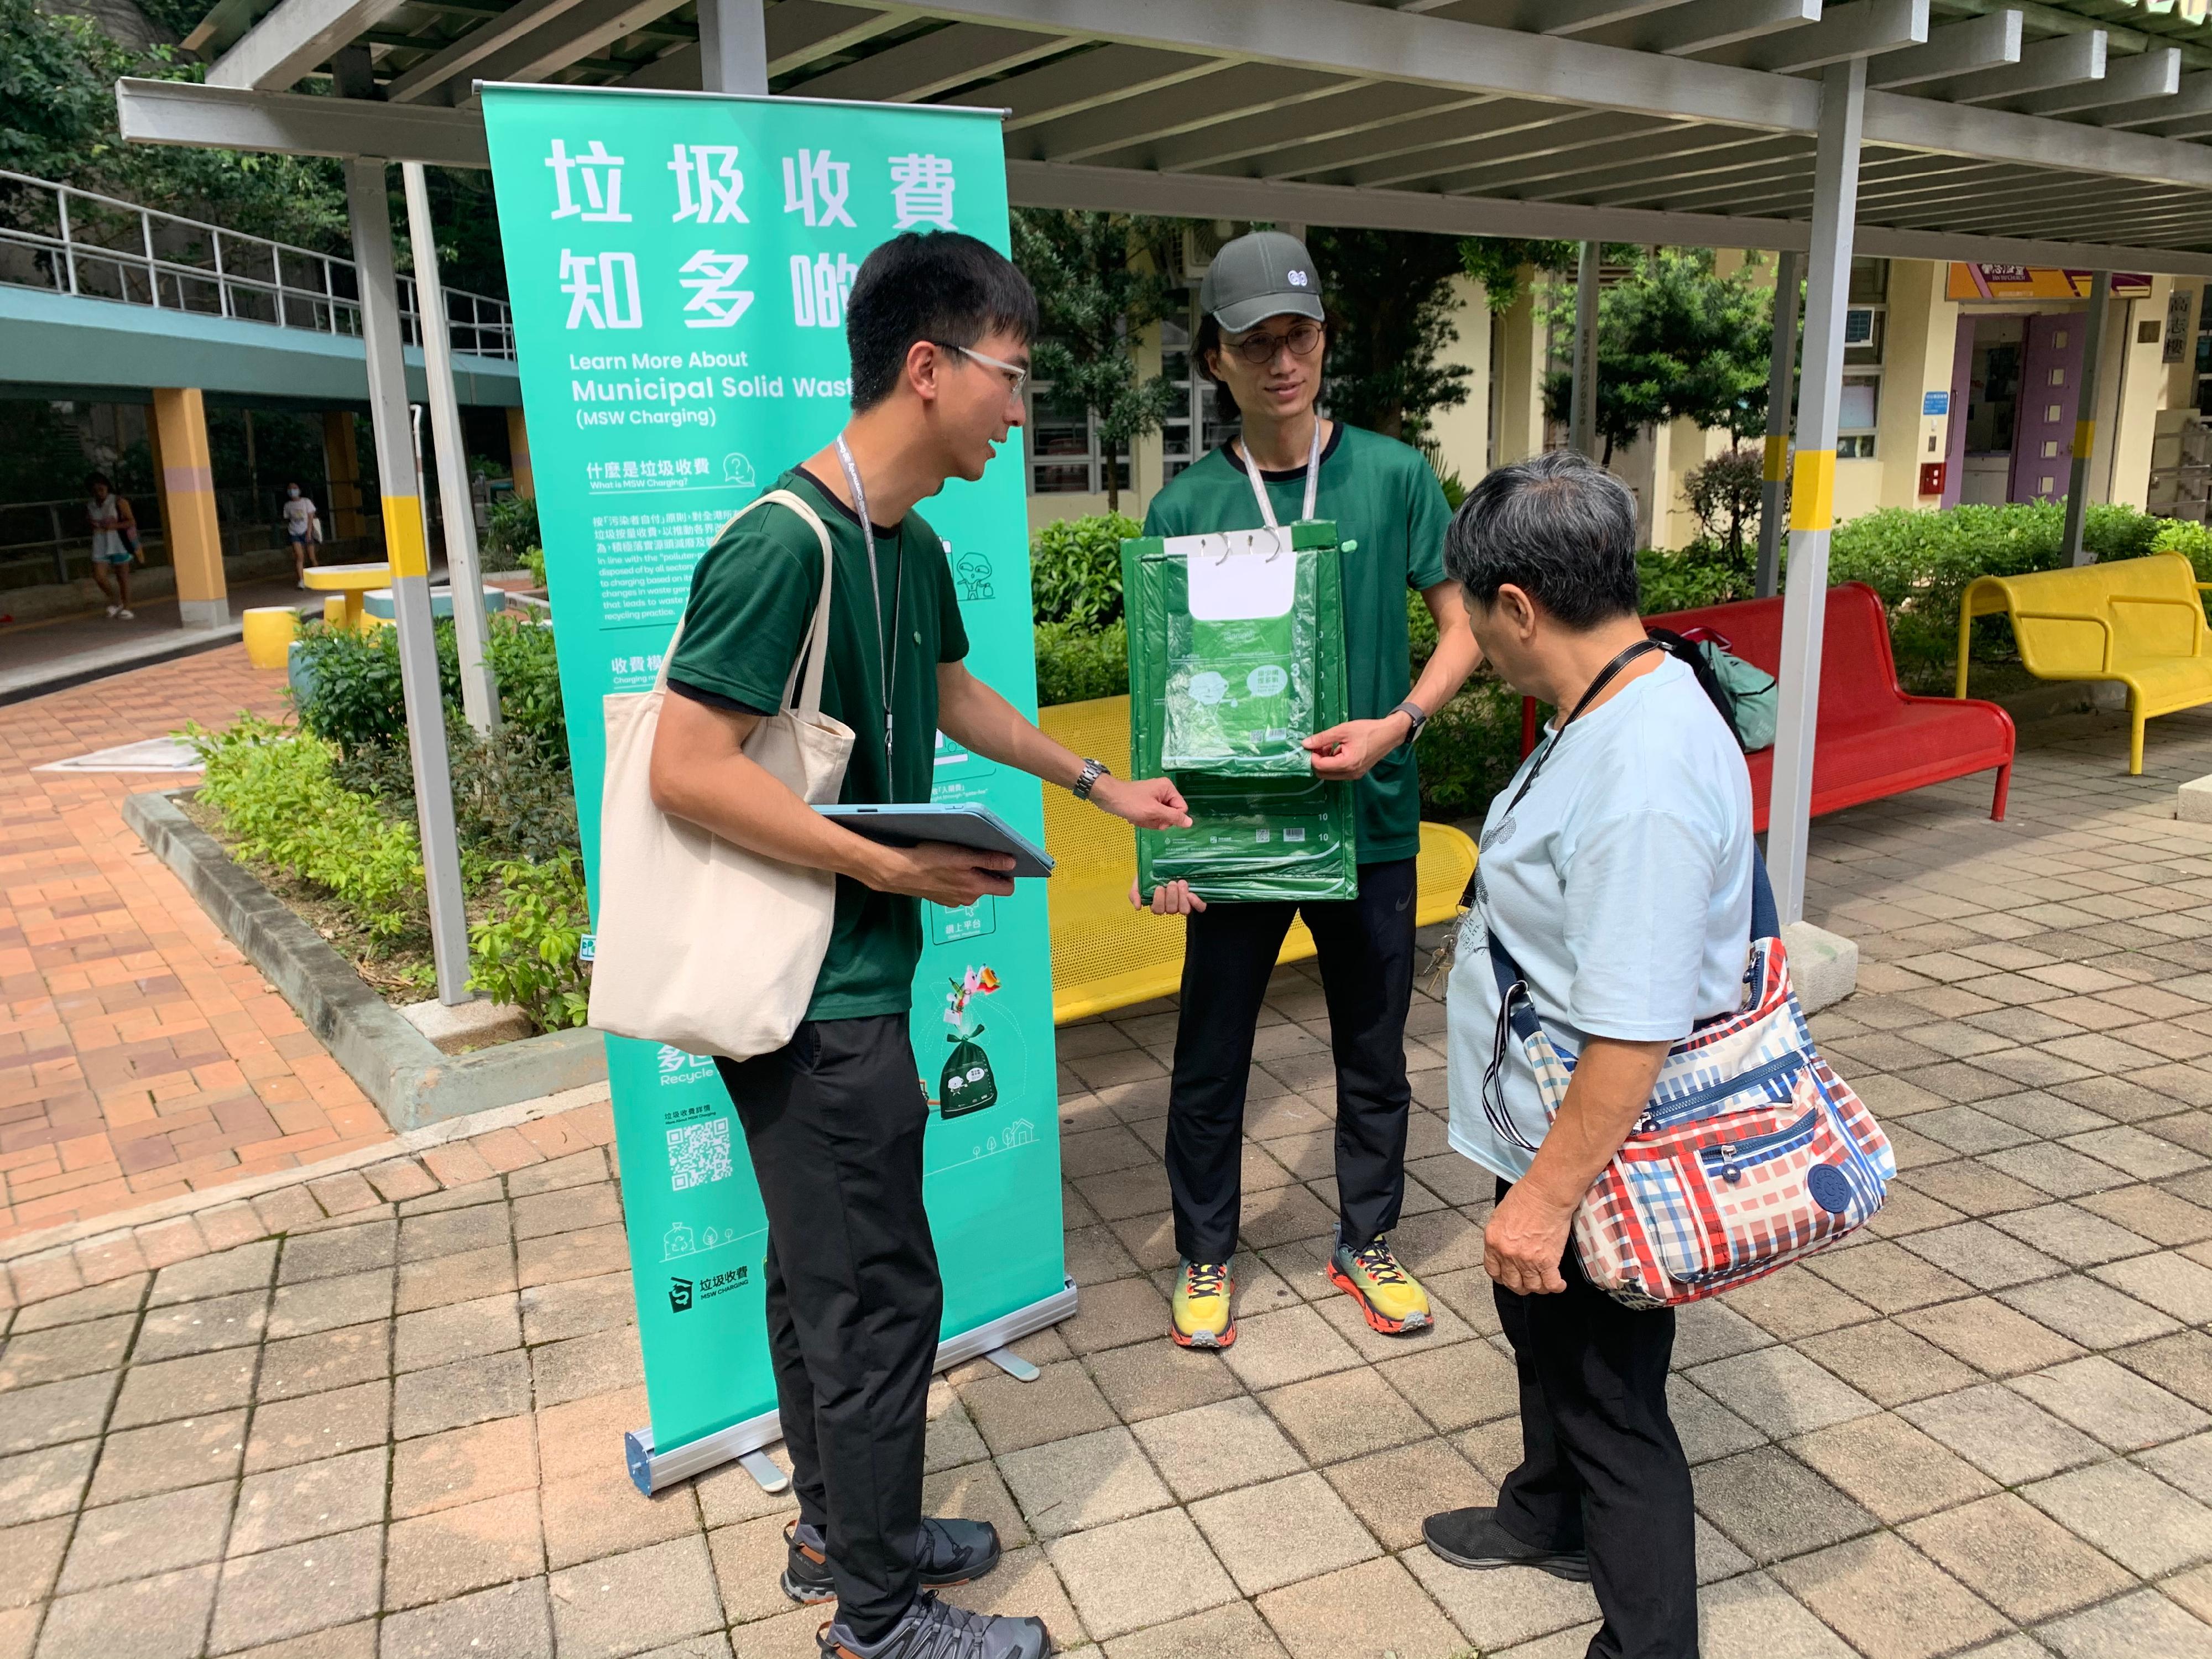 The Environmental Protection Department (EPD) has been actively preparing for the Municipal Solid Waste (MSW) charging to be implemented on April 1, 2024. The EPD's Green Outreach has commenced promotion for MSW charging in mid-August by providing support for waste reduction and recycling in the community. Photo shows Green Outreach members briefing a resident of Kwun Tong District on the MSW charging.